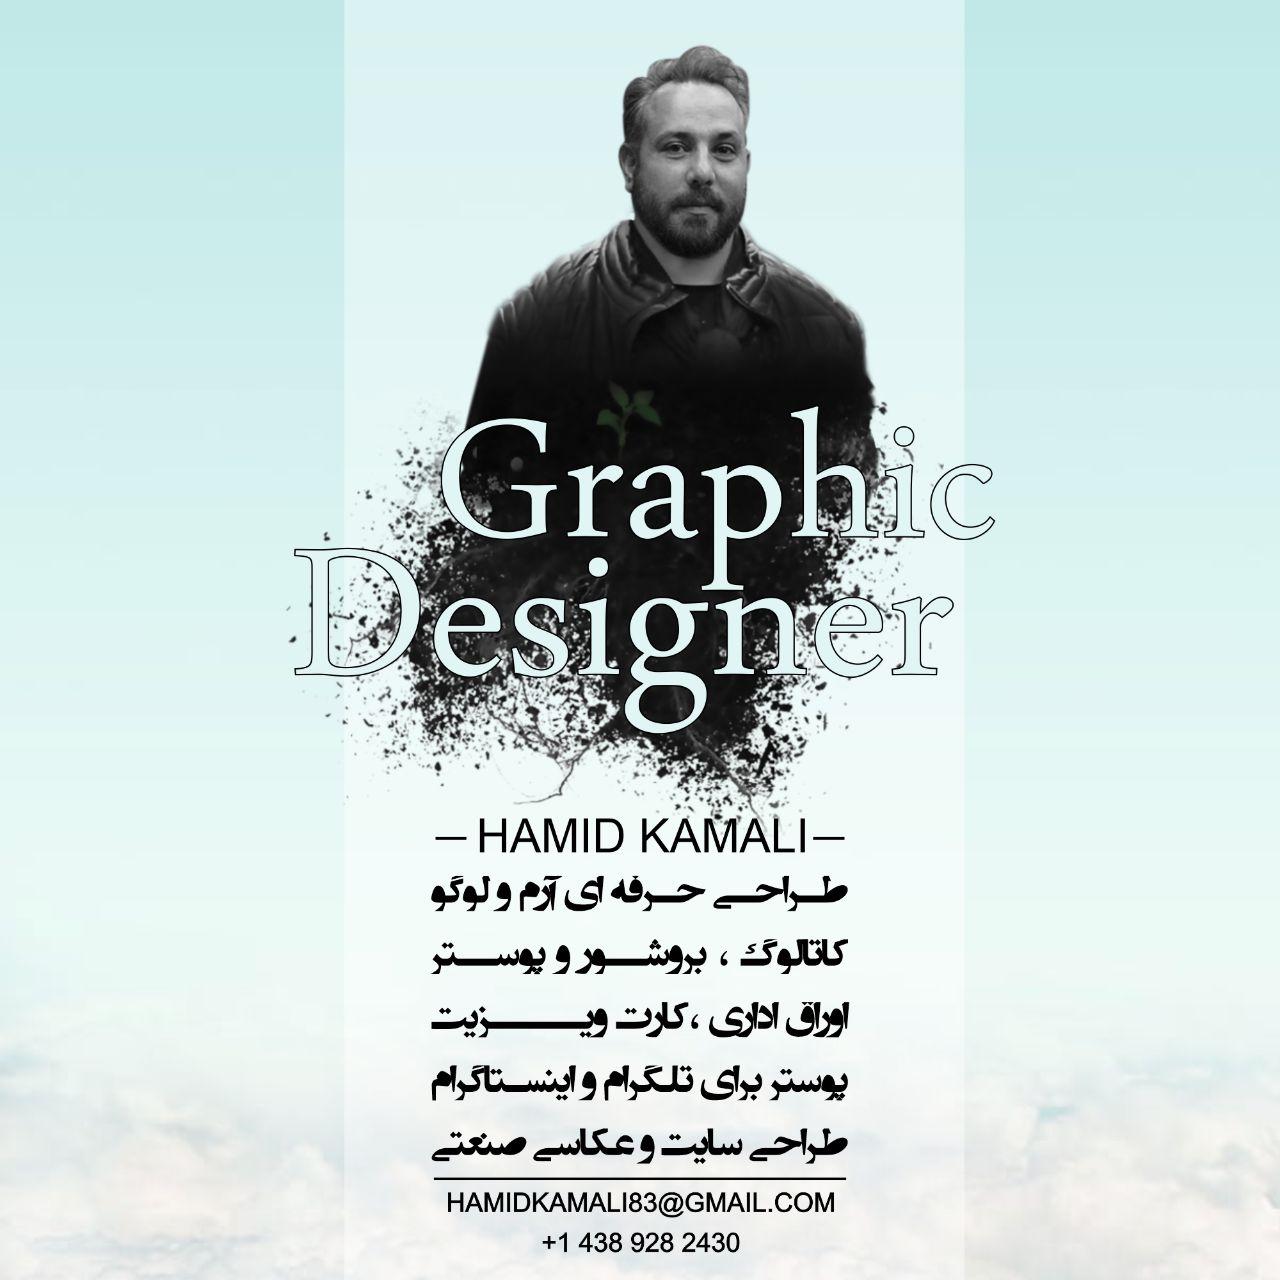 Designer and graphic artist Hamid Kamali in Montreal